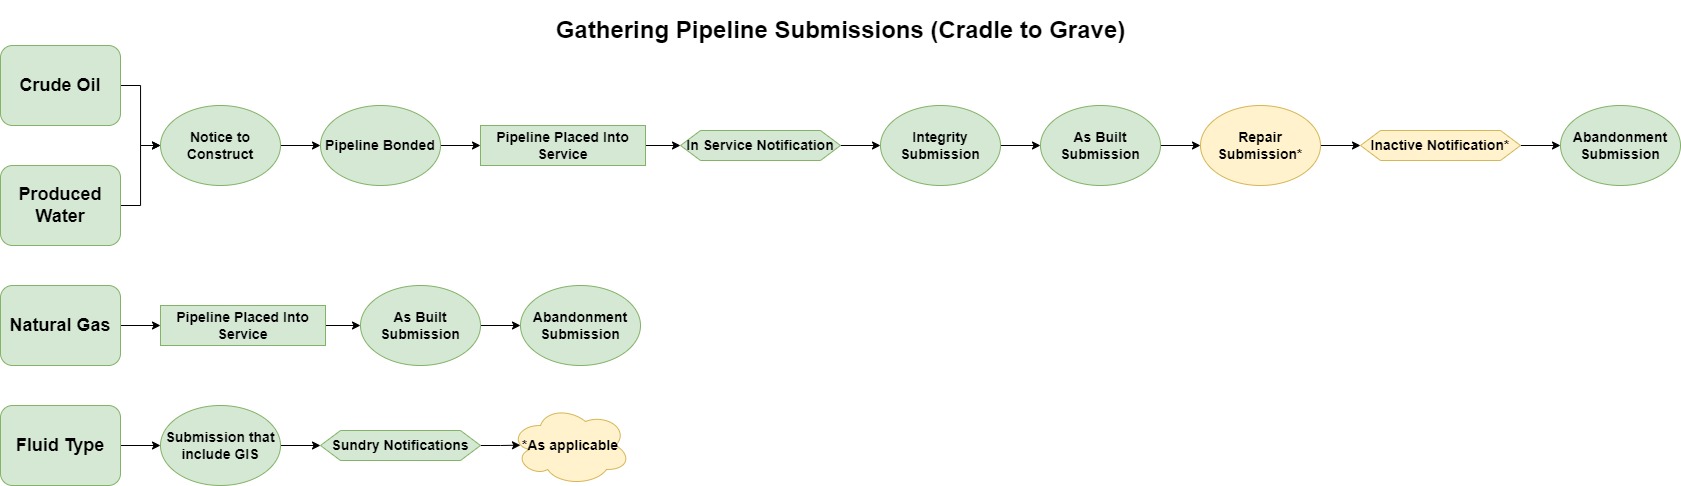 Cradle to Grave Submission Flow Chart